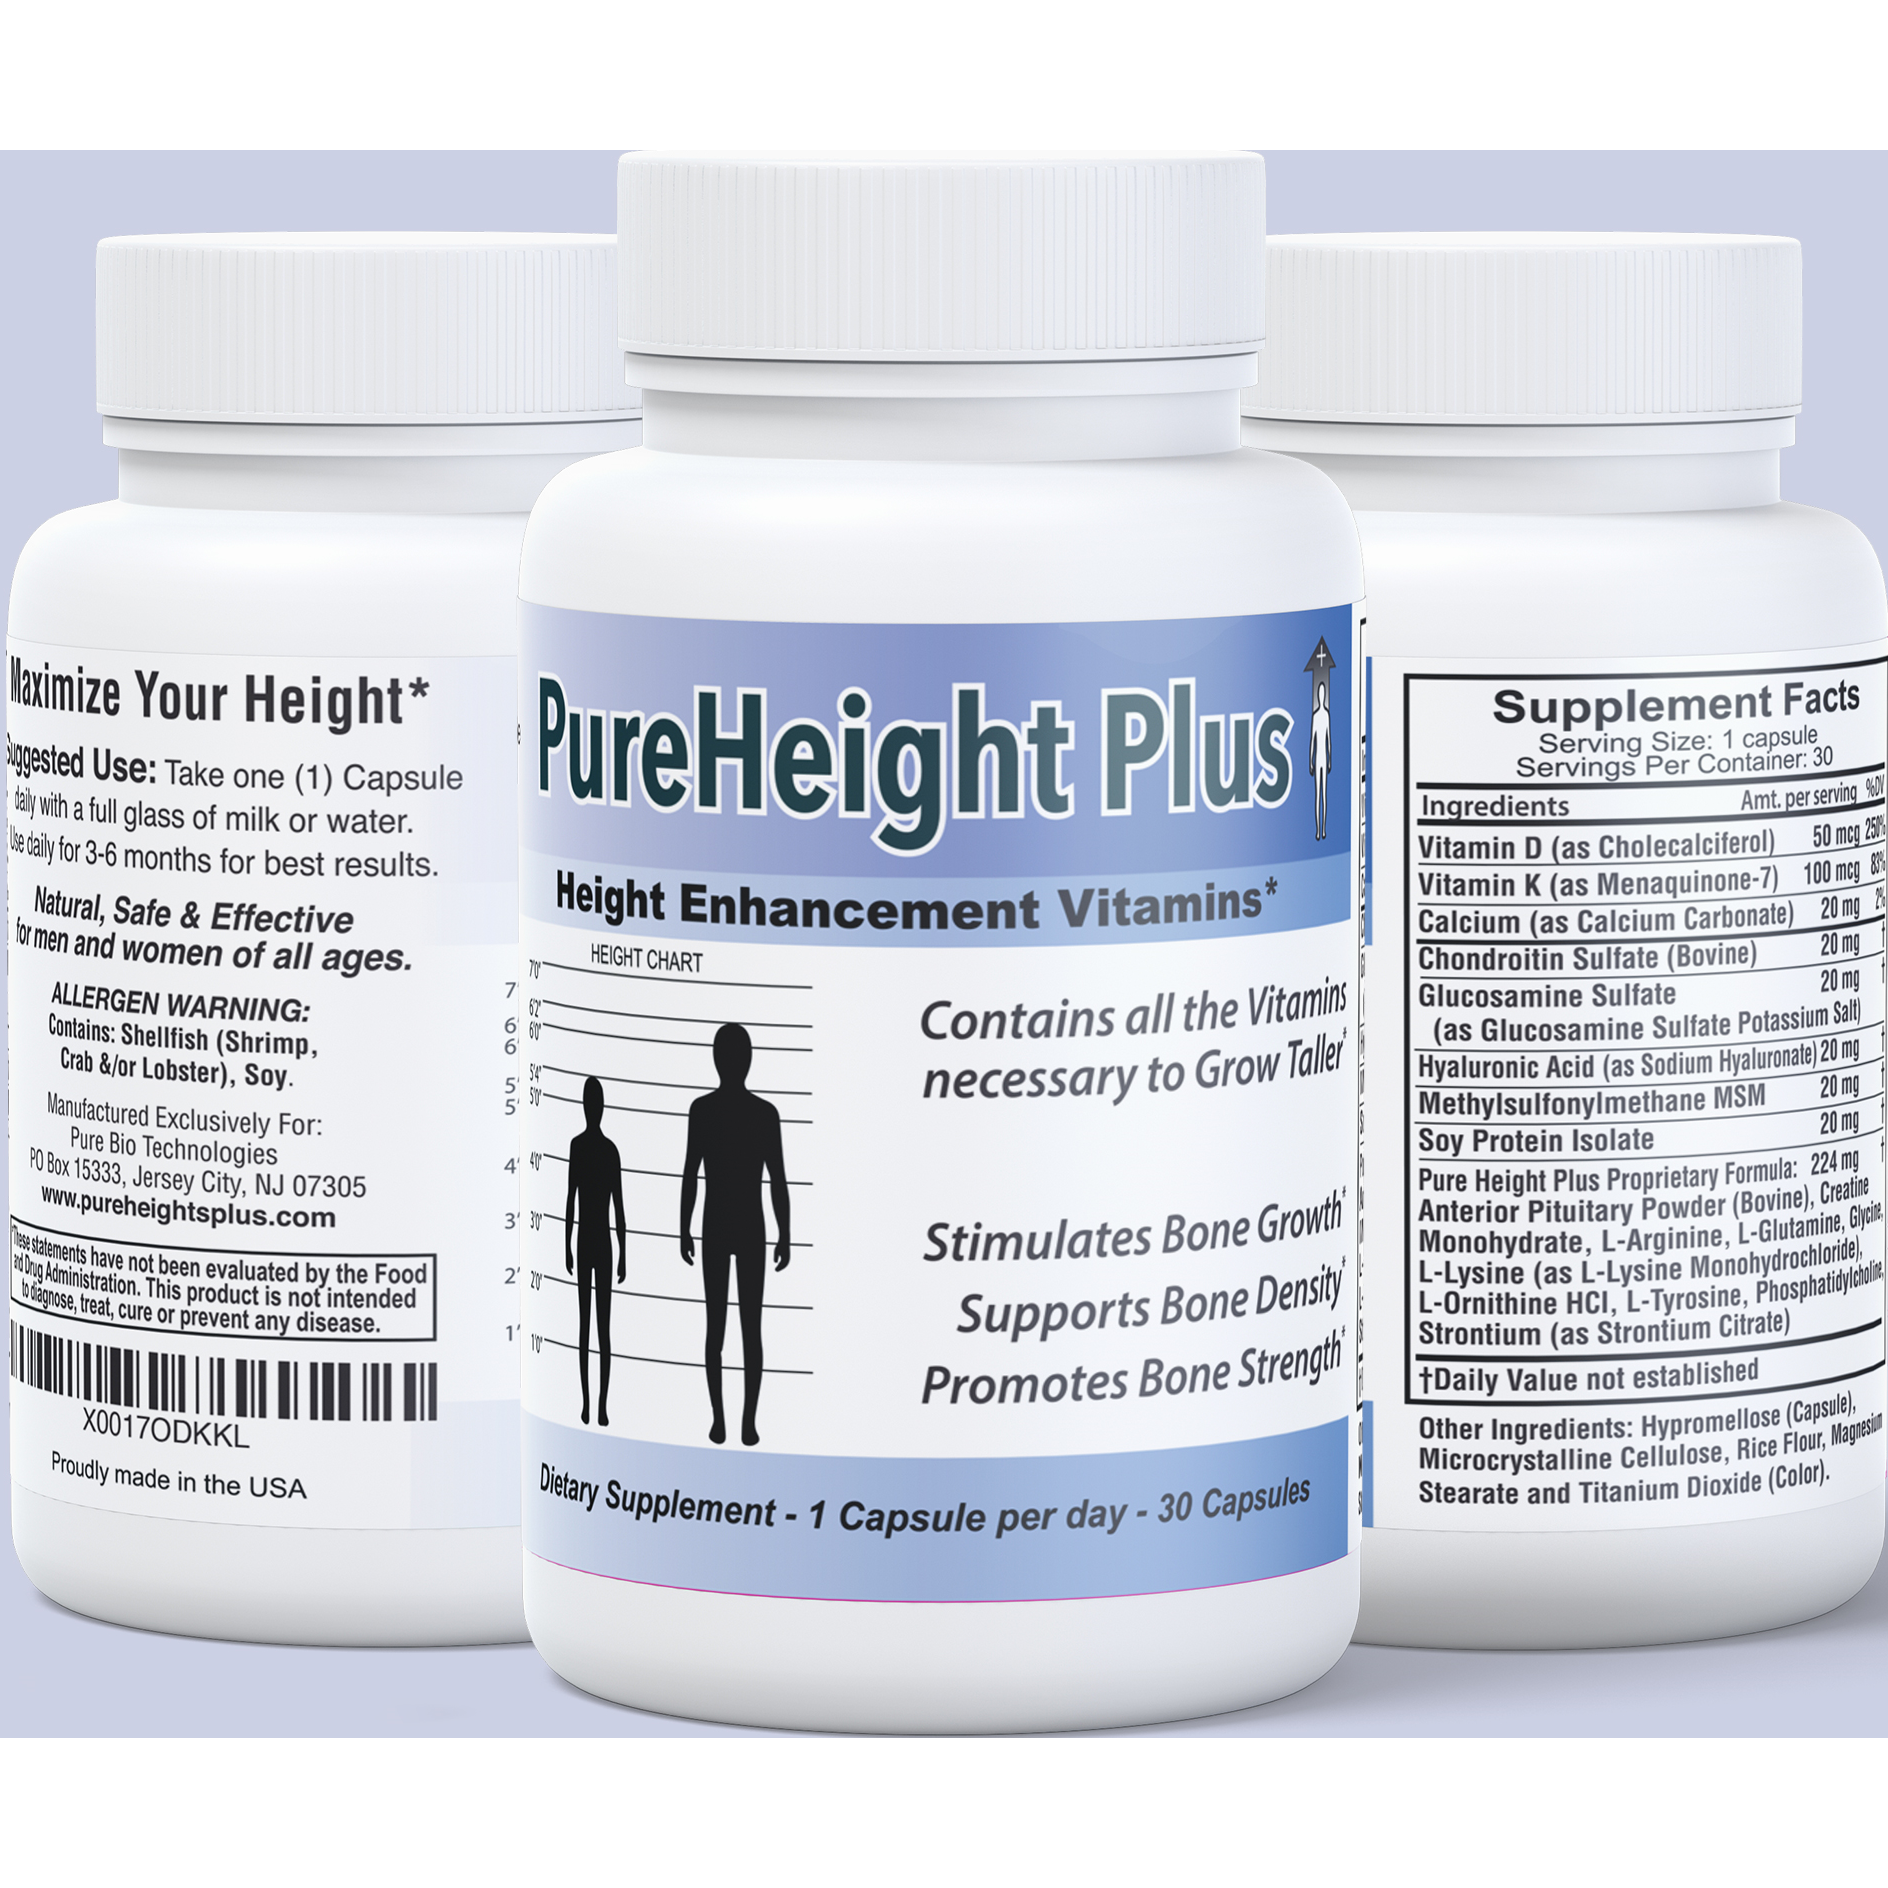 height-enhancer-growth-vitamins with cash back rebate